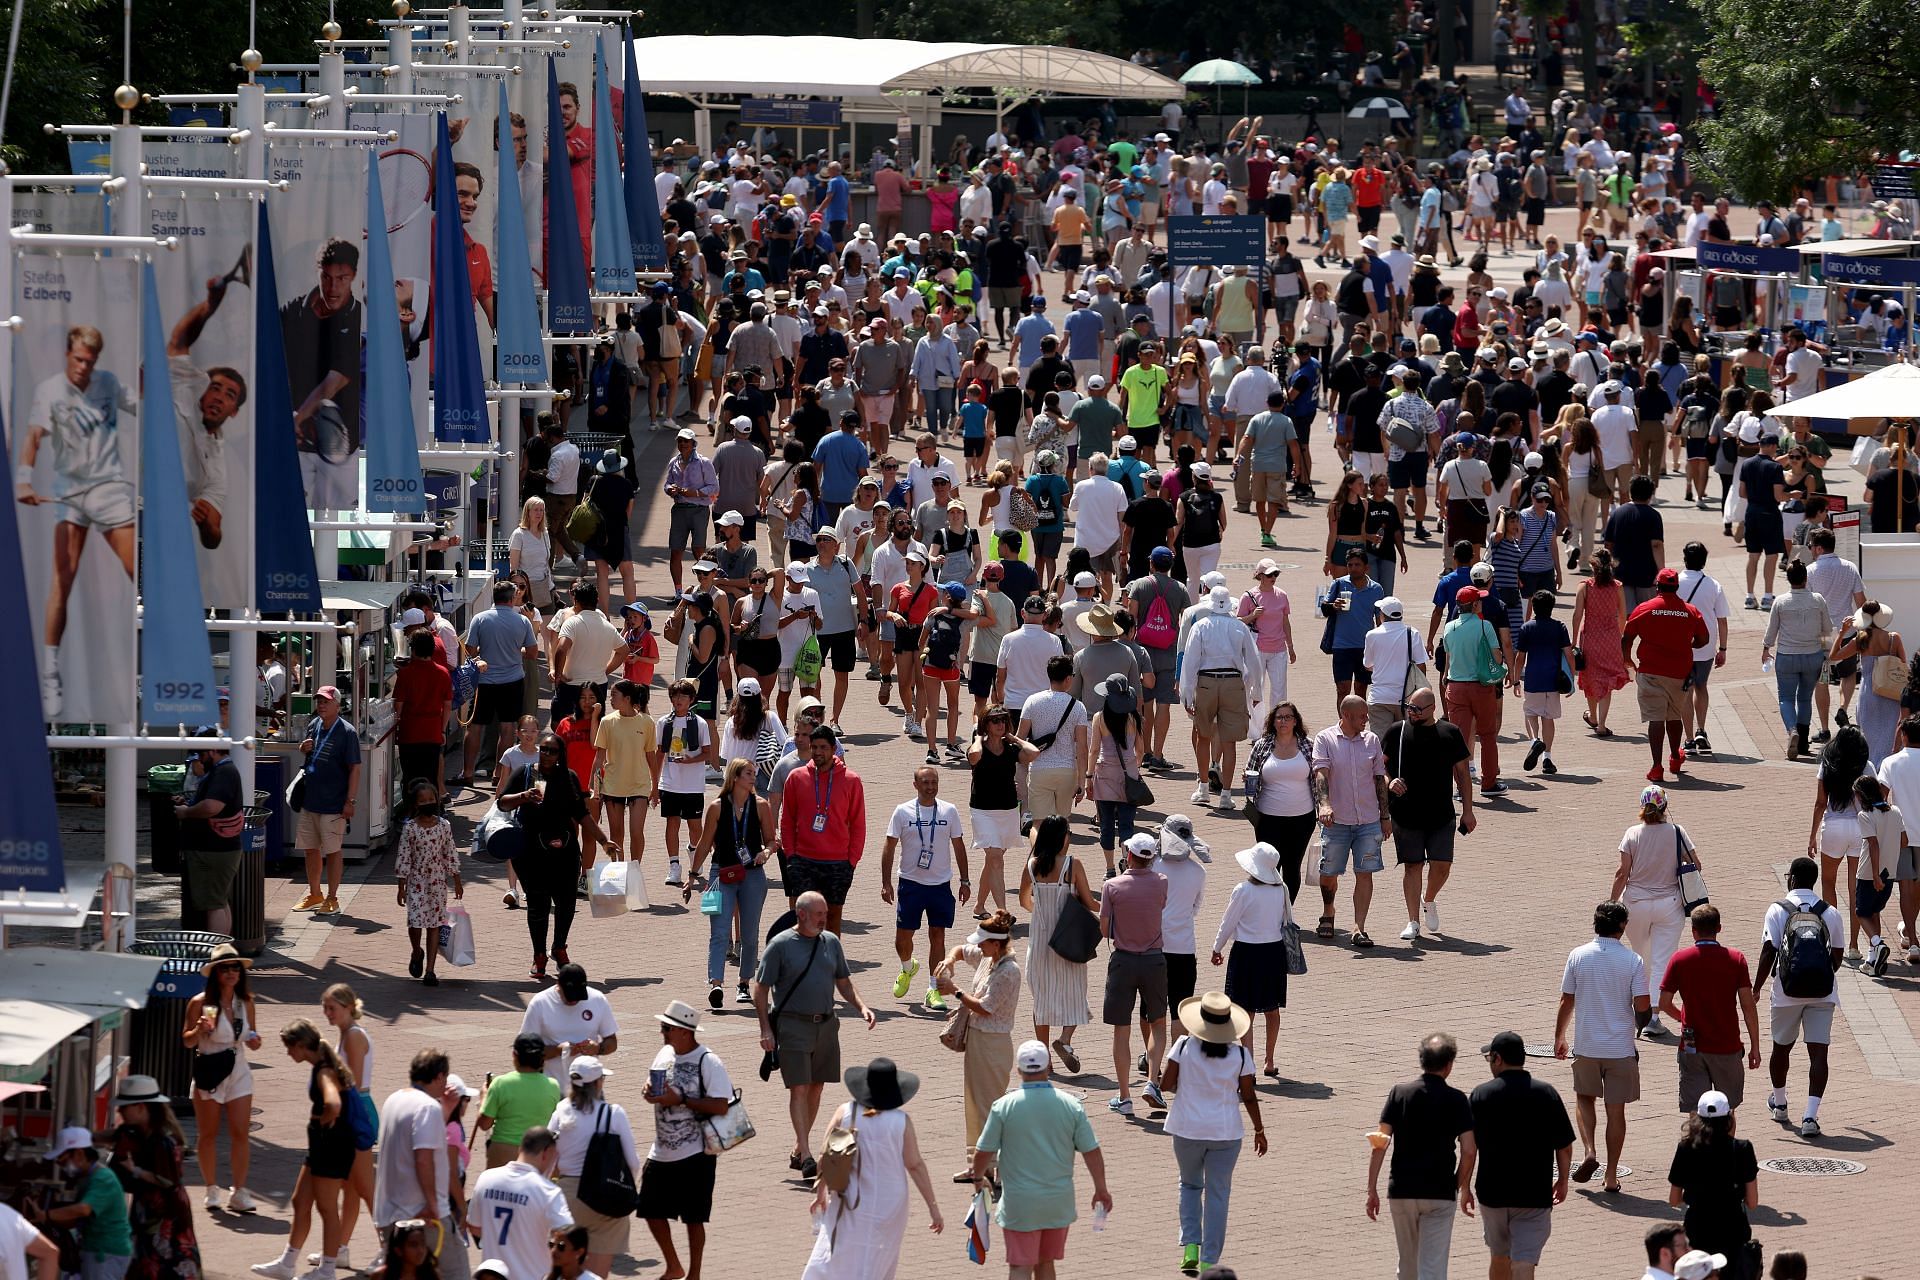 Crowds assemble at the 2022 US Open - Day 1.